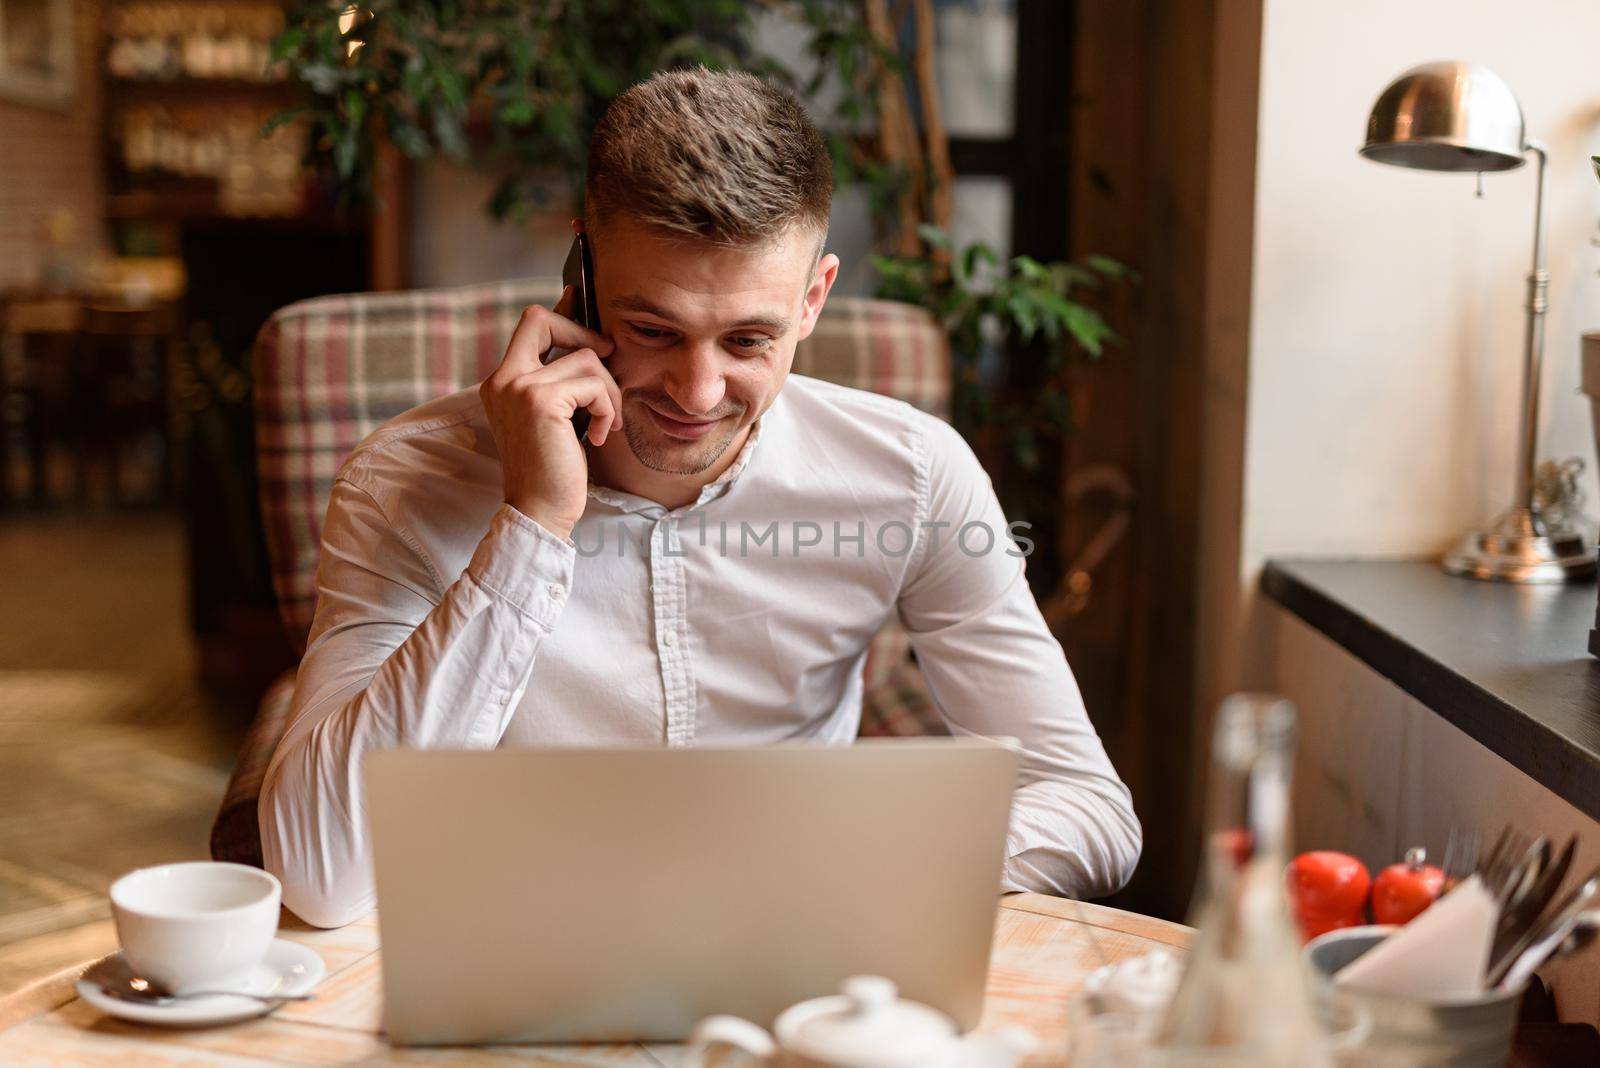 Waist up of smiling handsome businessman talking on smartphone while looking at laptop screen in cafe. Lifestyle concept